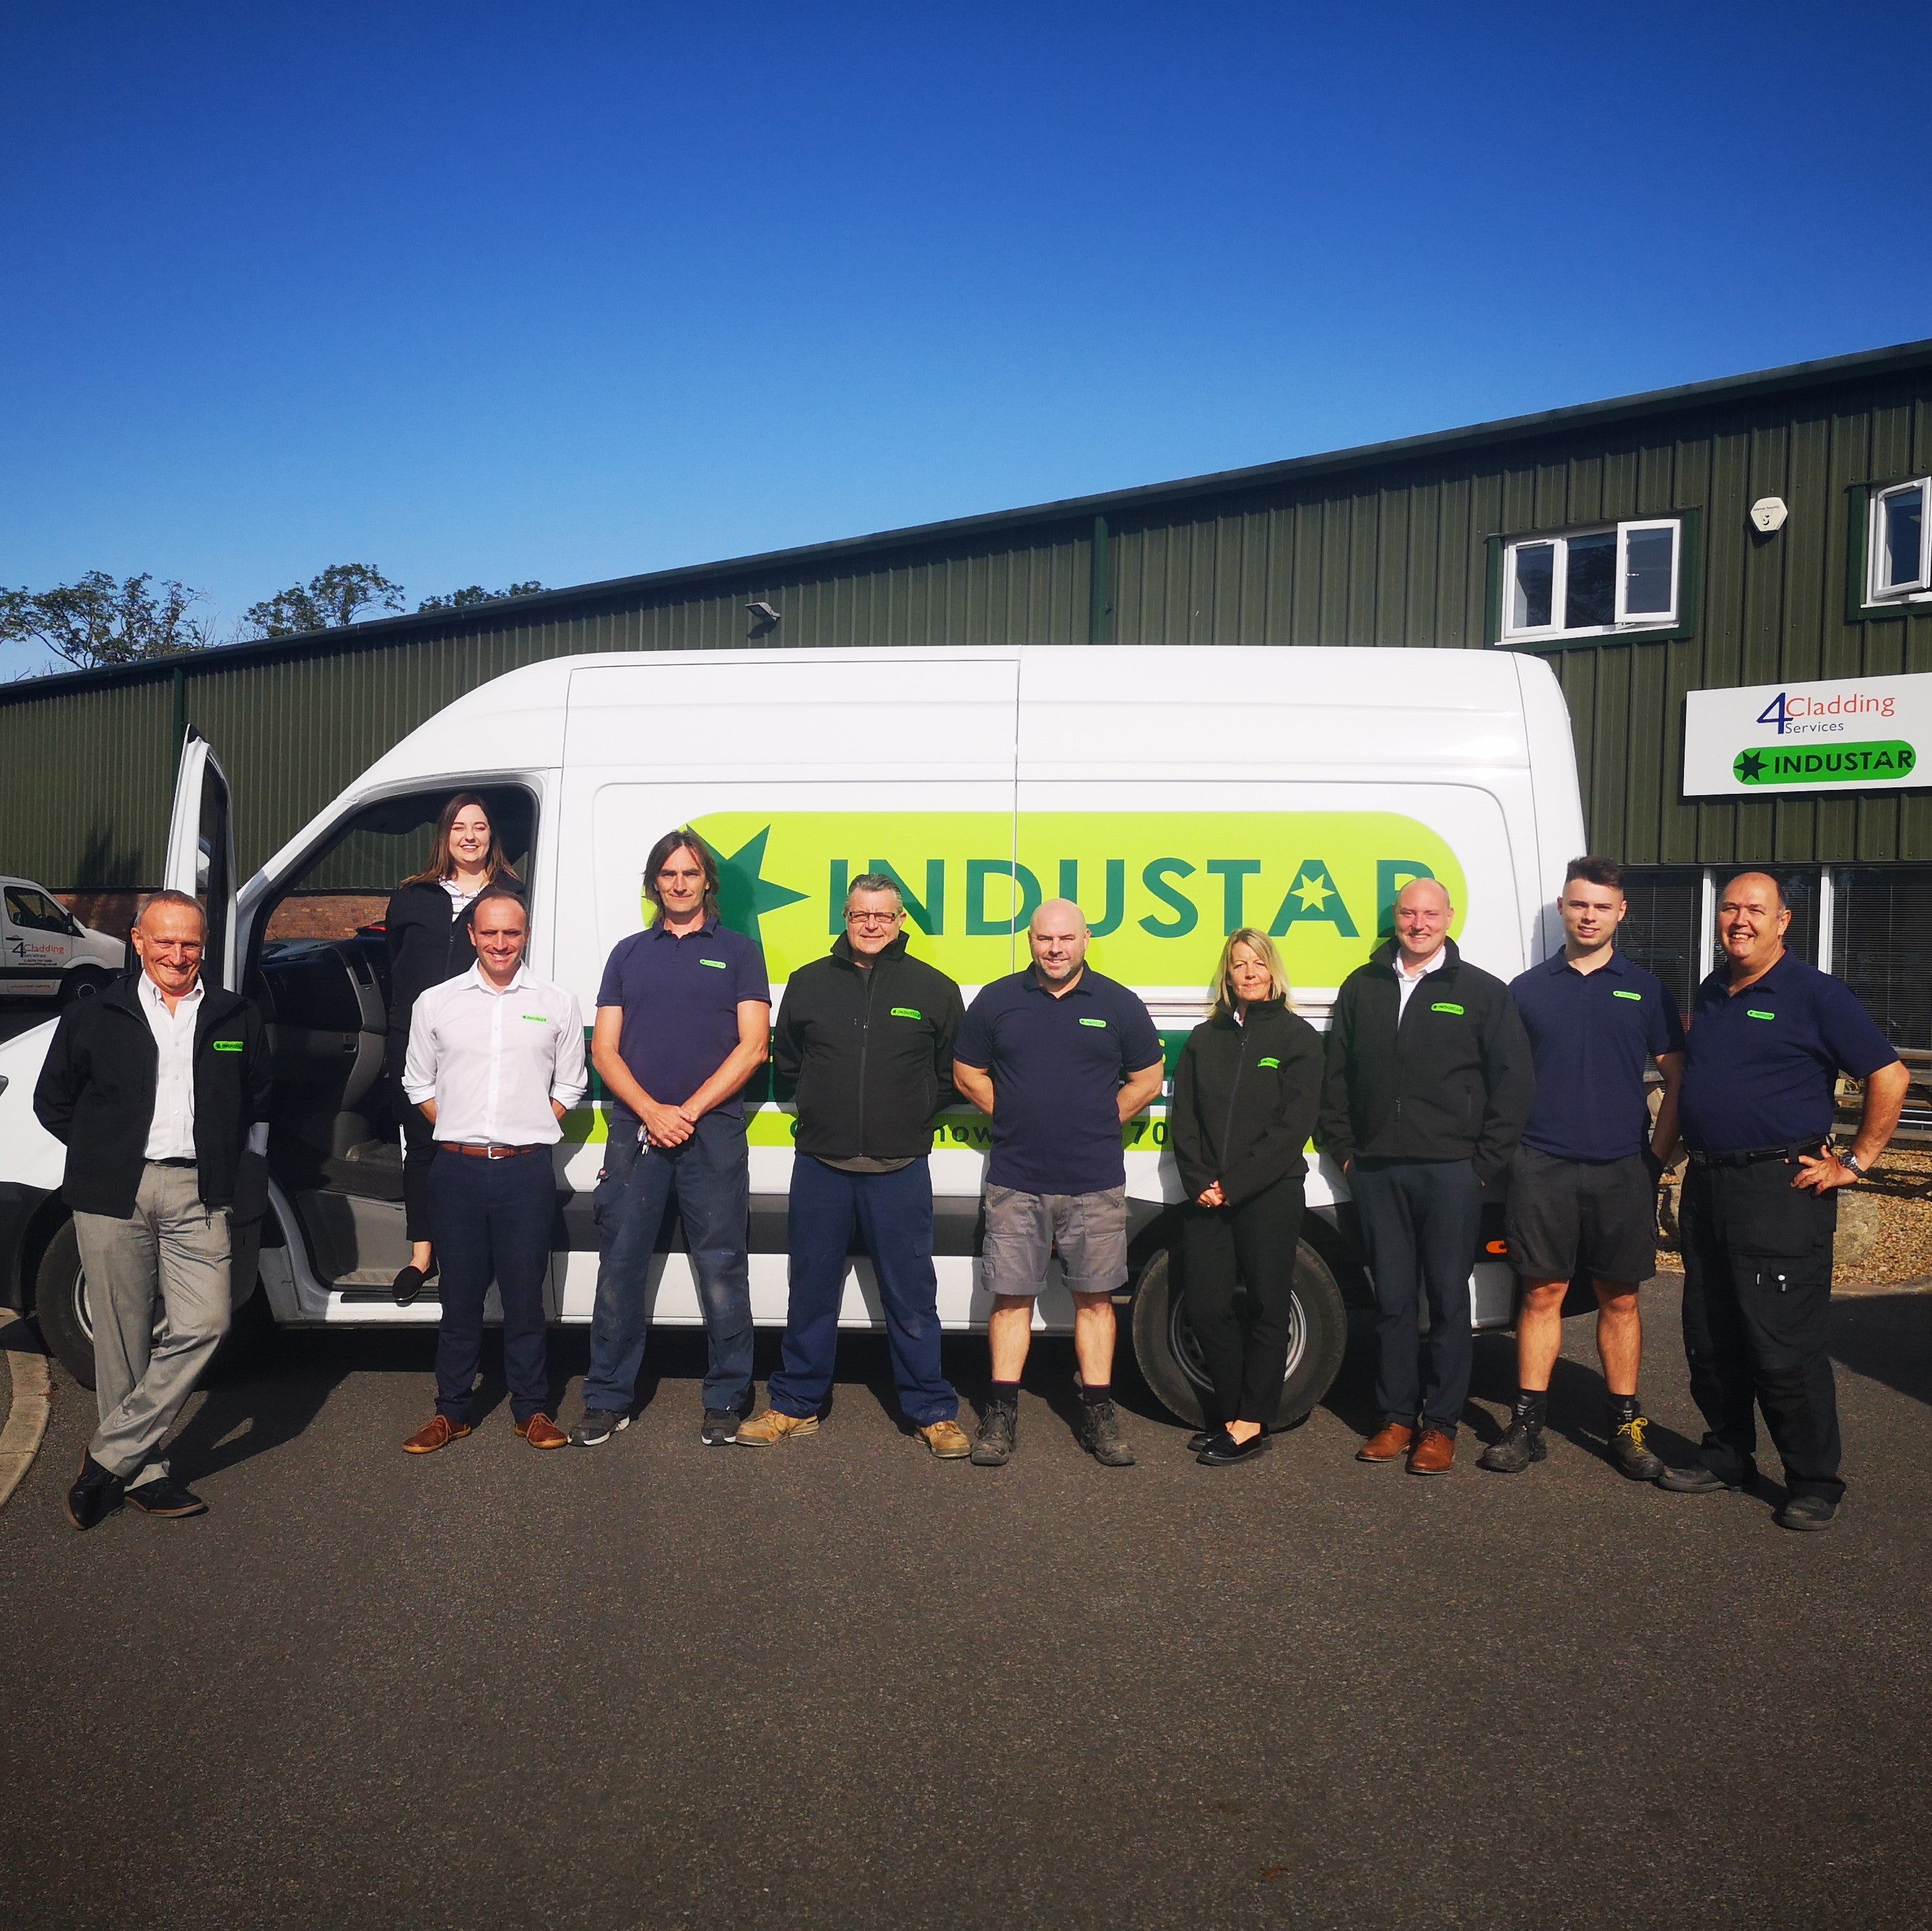 cladding mate and industar team